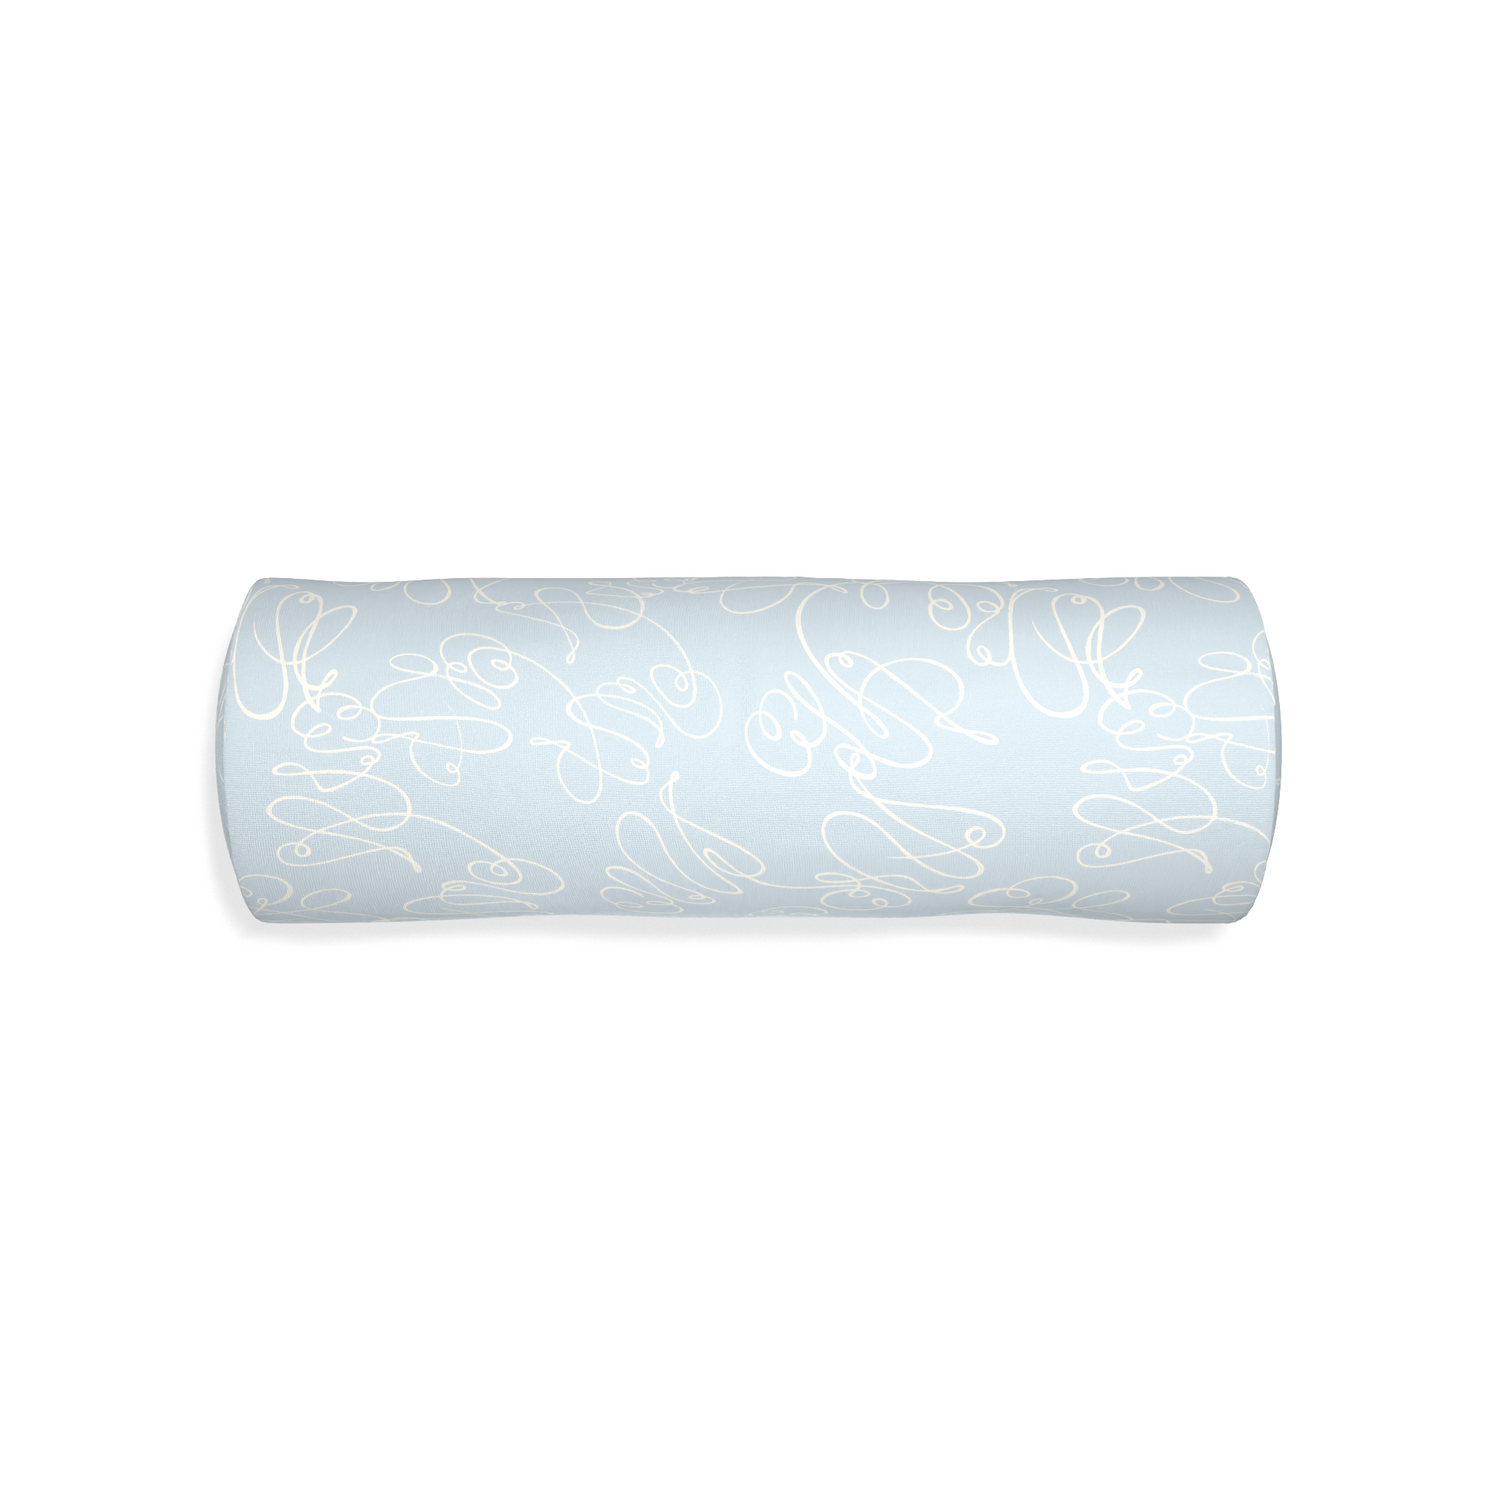 Bolster mirabella custom powder blue abstractpillow with none on white background